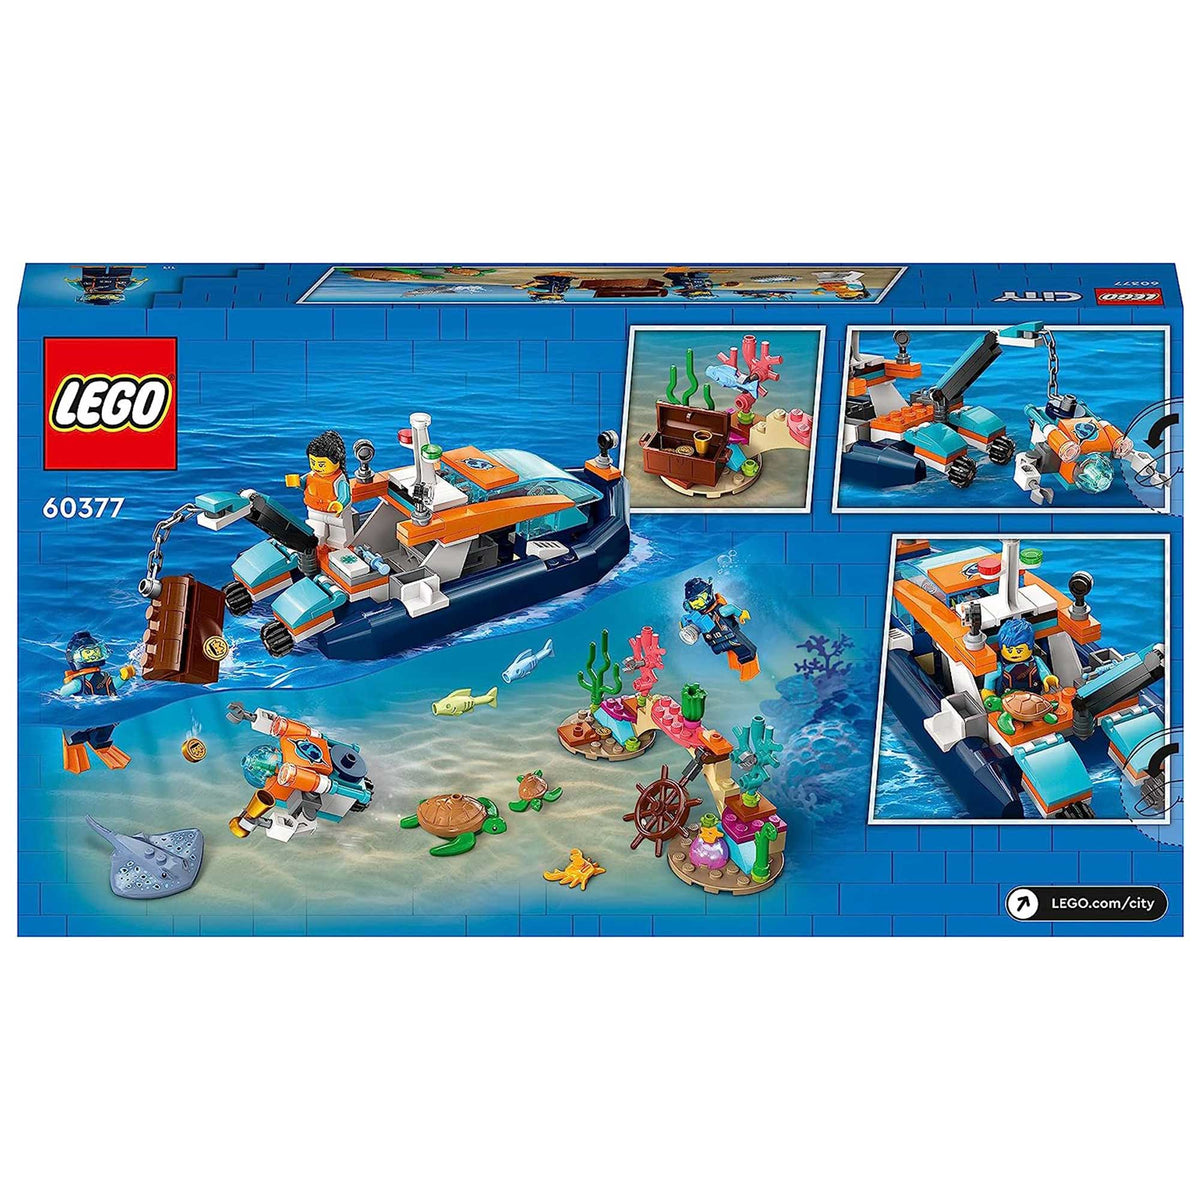 LEGO City Explorer Diving Boat Set with Submarine Toy